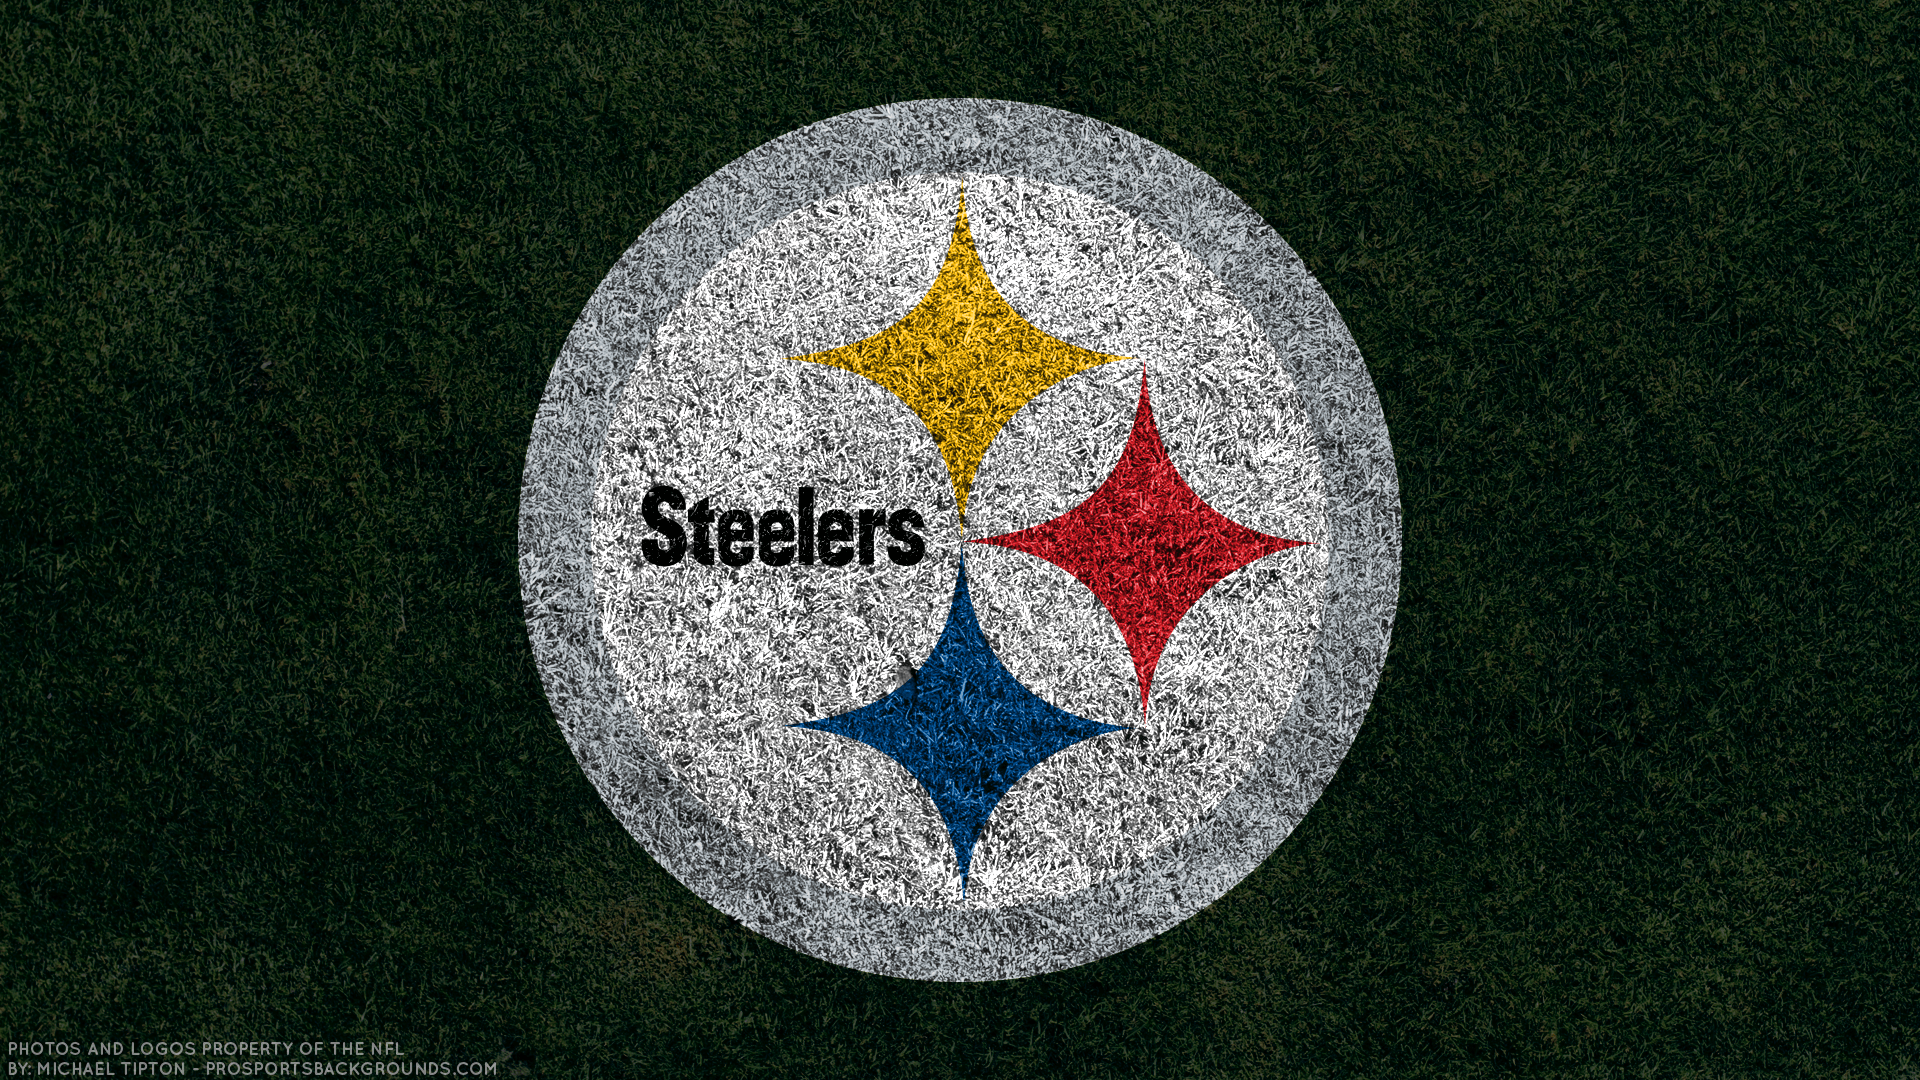 Pittsburgh Steelers Wallpaper. iPhone. Android